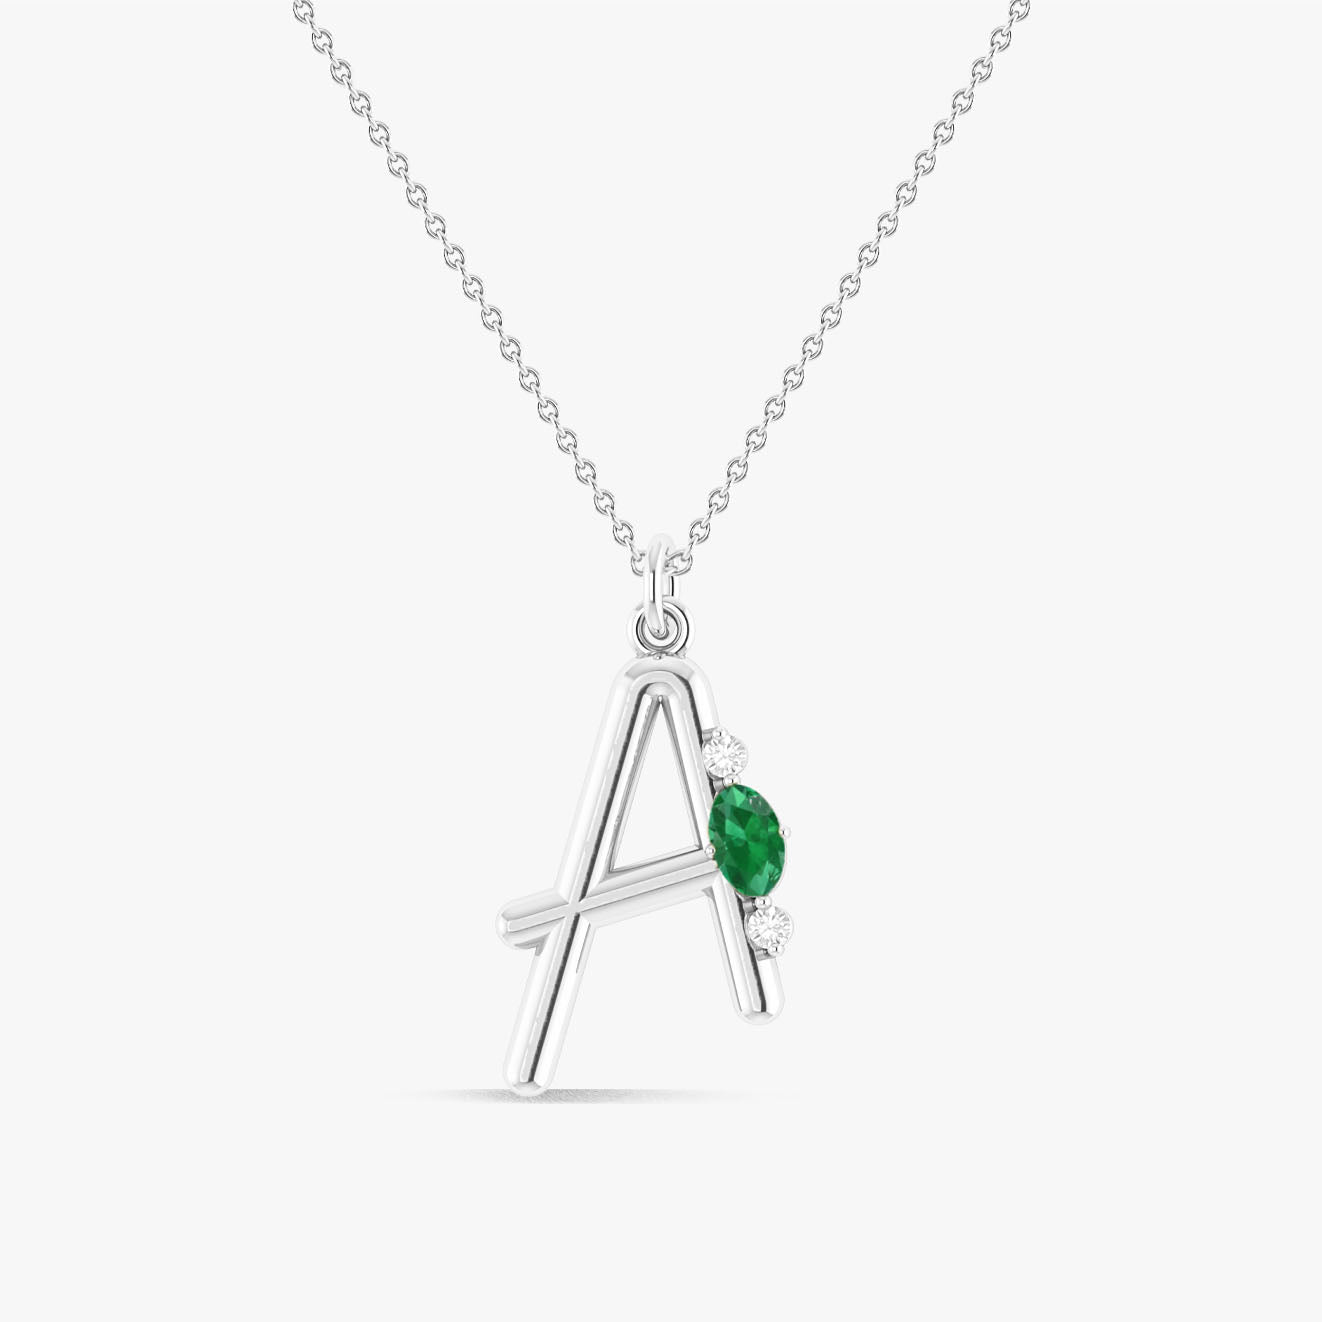 Capital "A" Emerald Initial Necklace